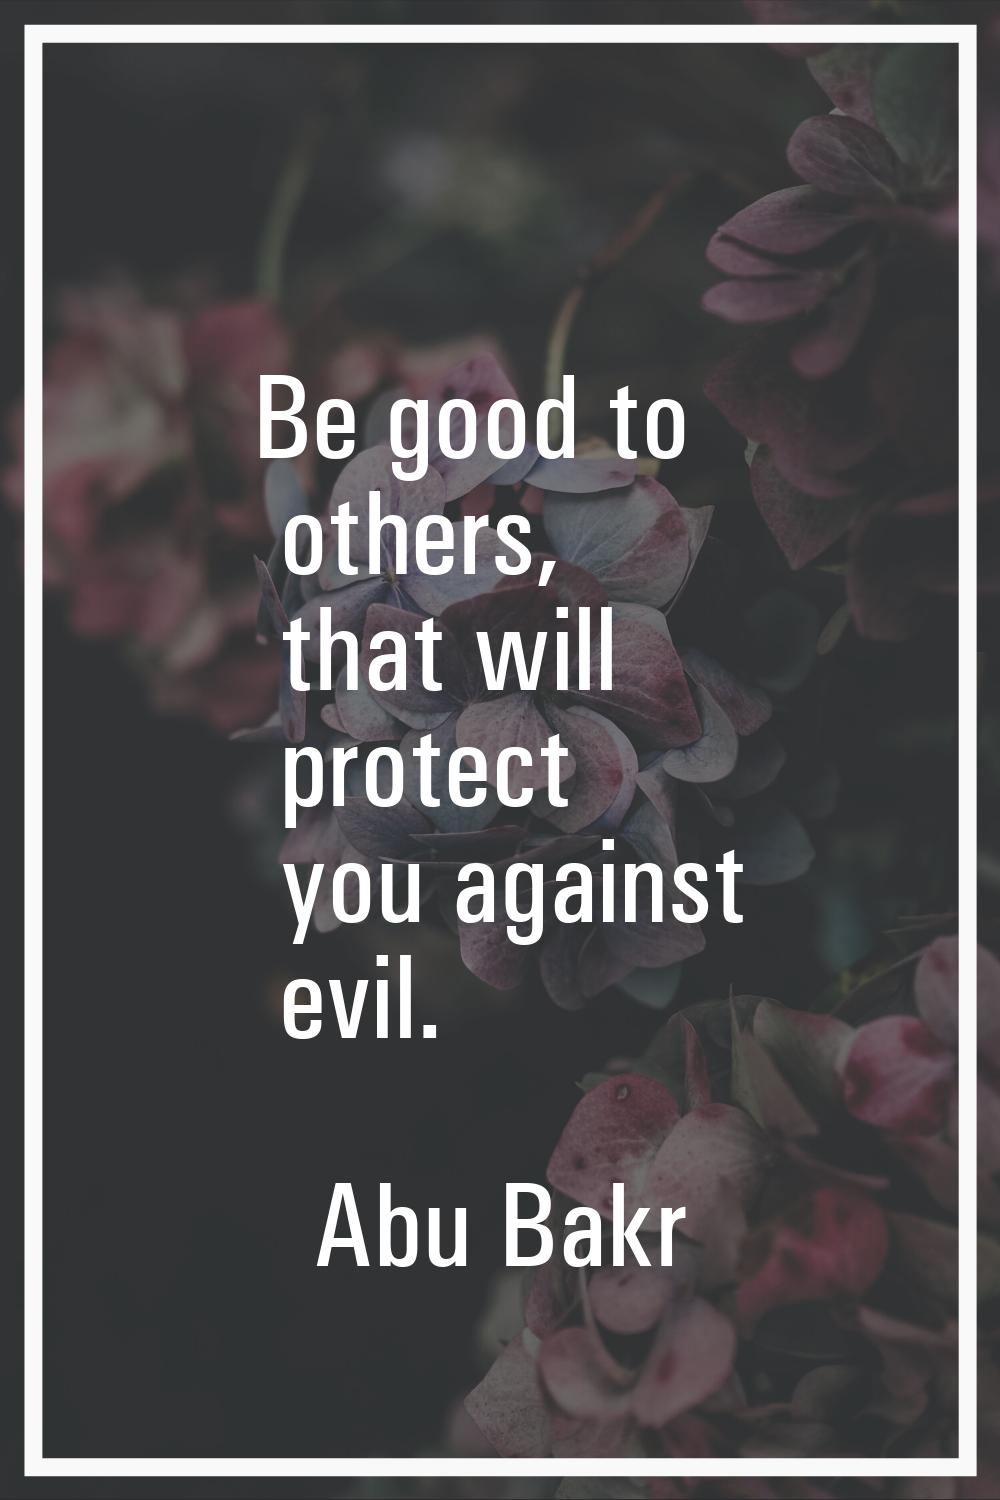 Be good to others, that will protect you against evil.